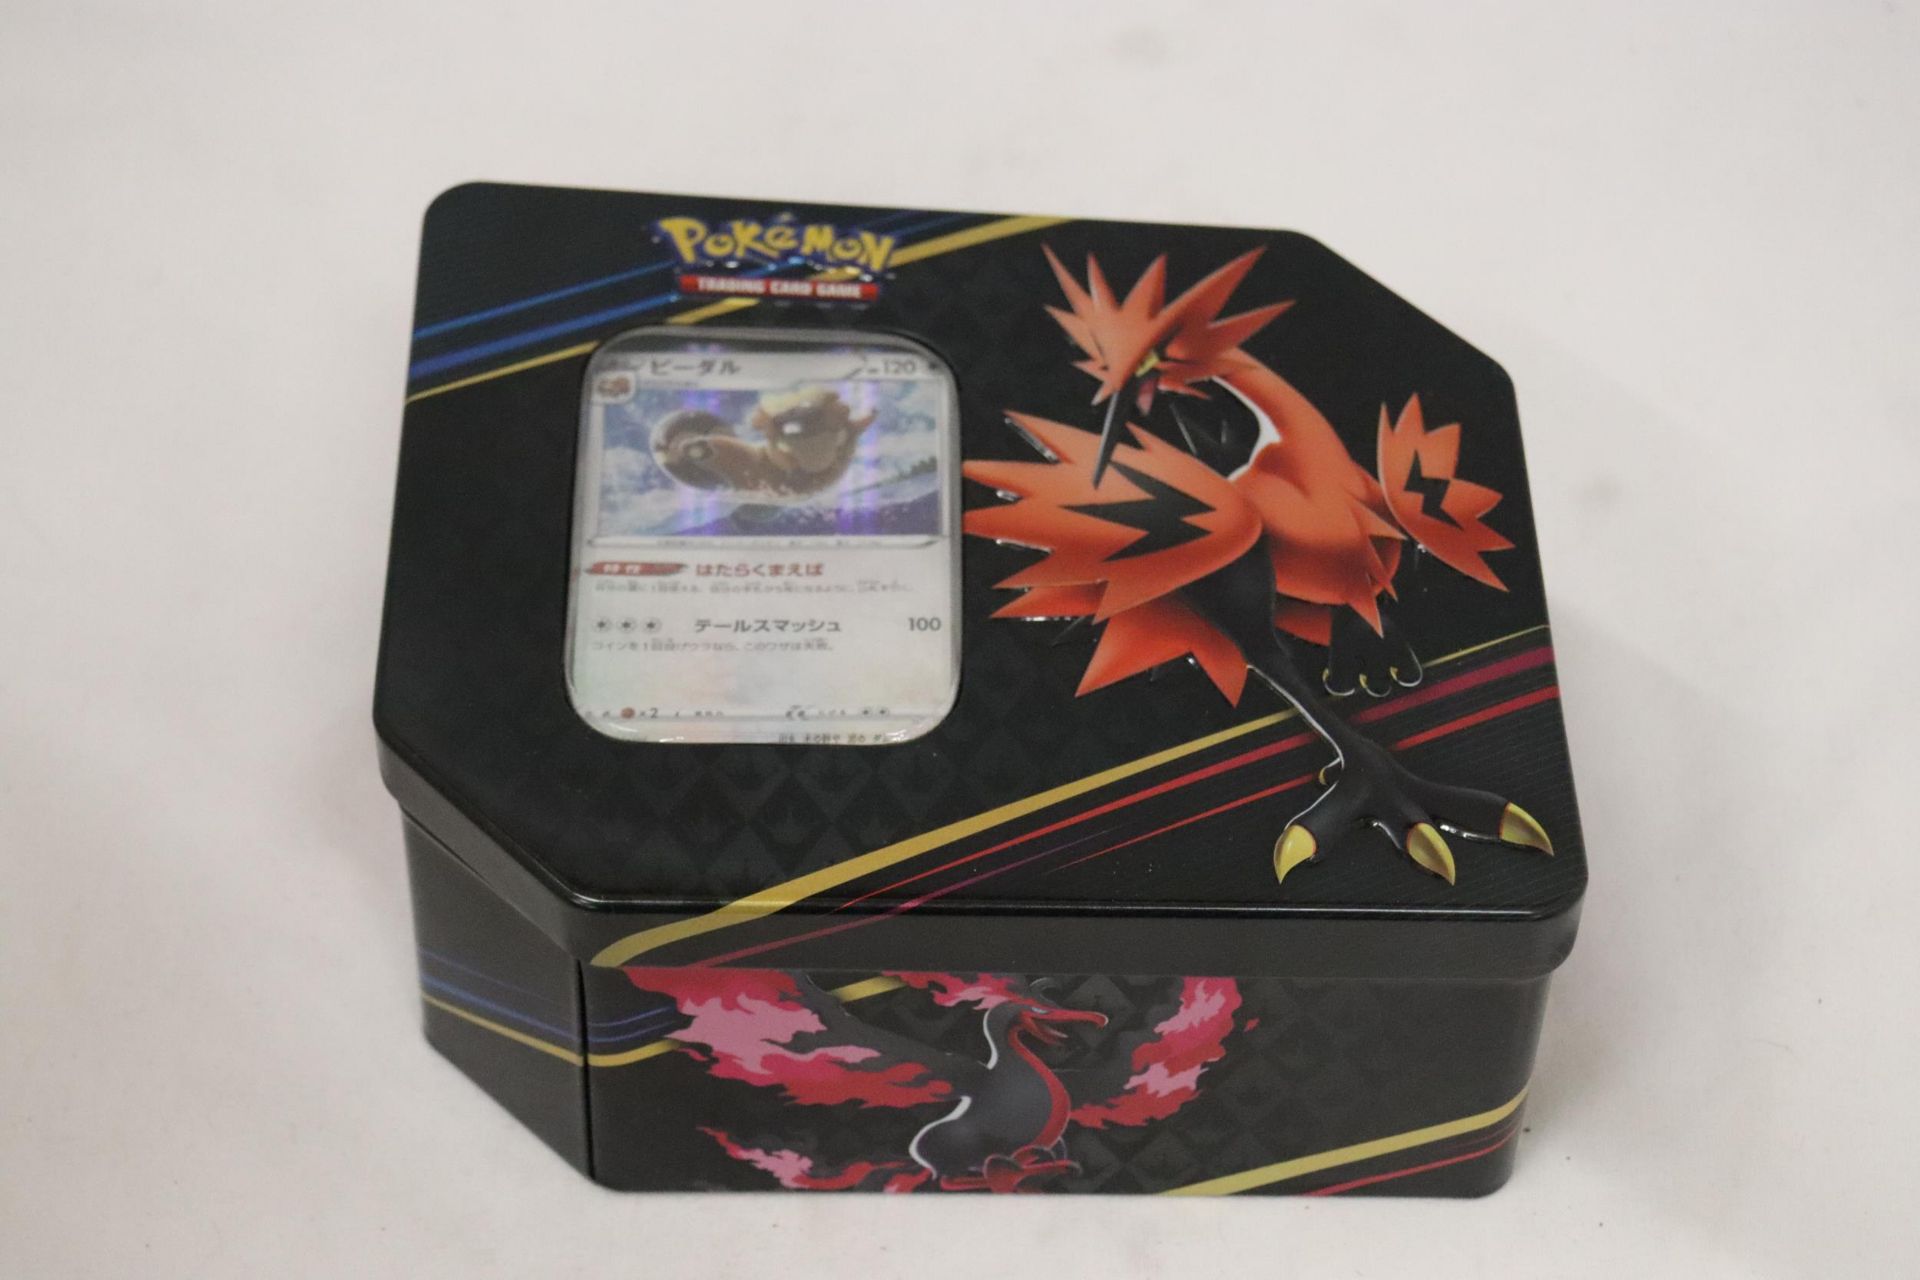 A POKEMON COLLECTOR'S TIN FULL OF JAPANESE CARDS - Image 8 of 8